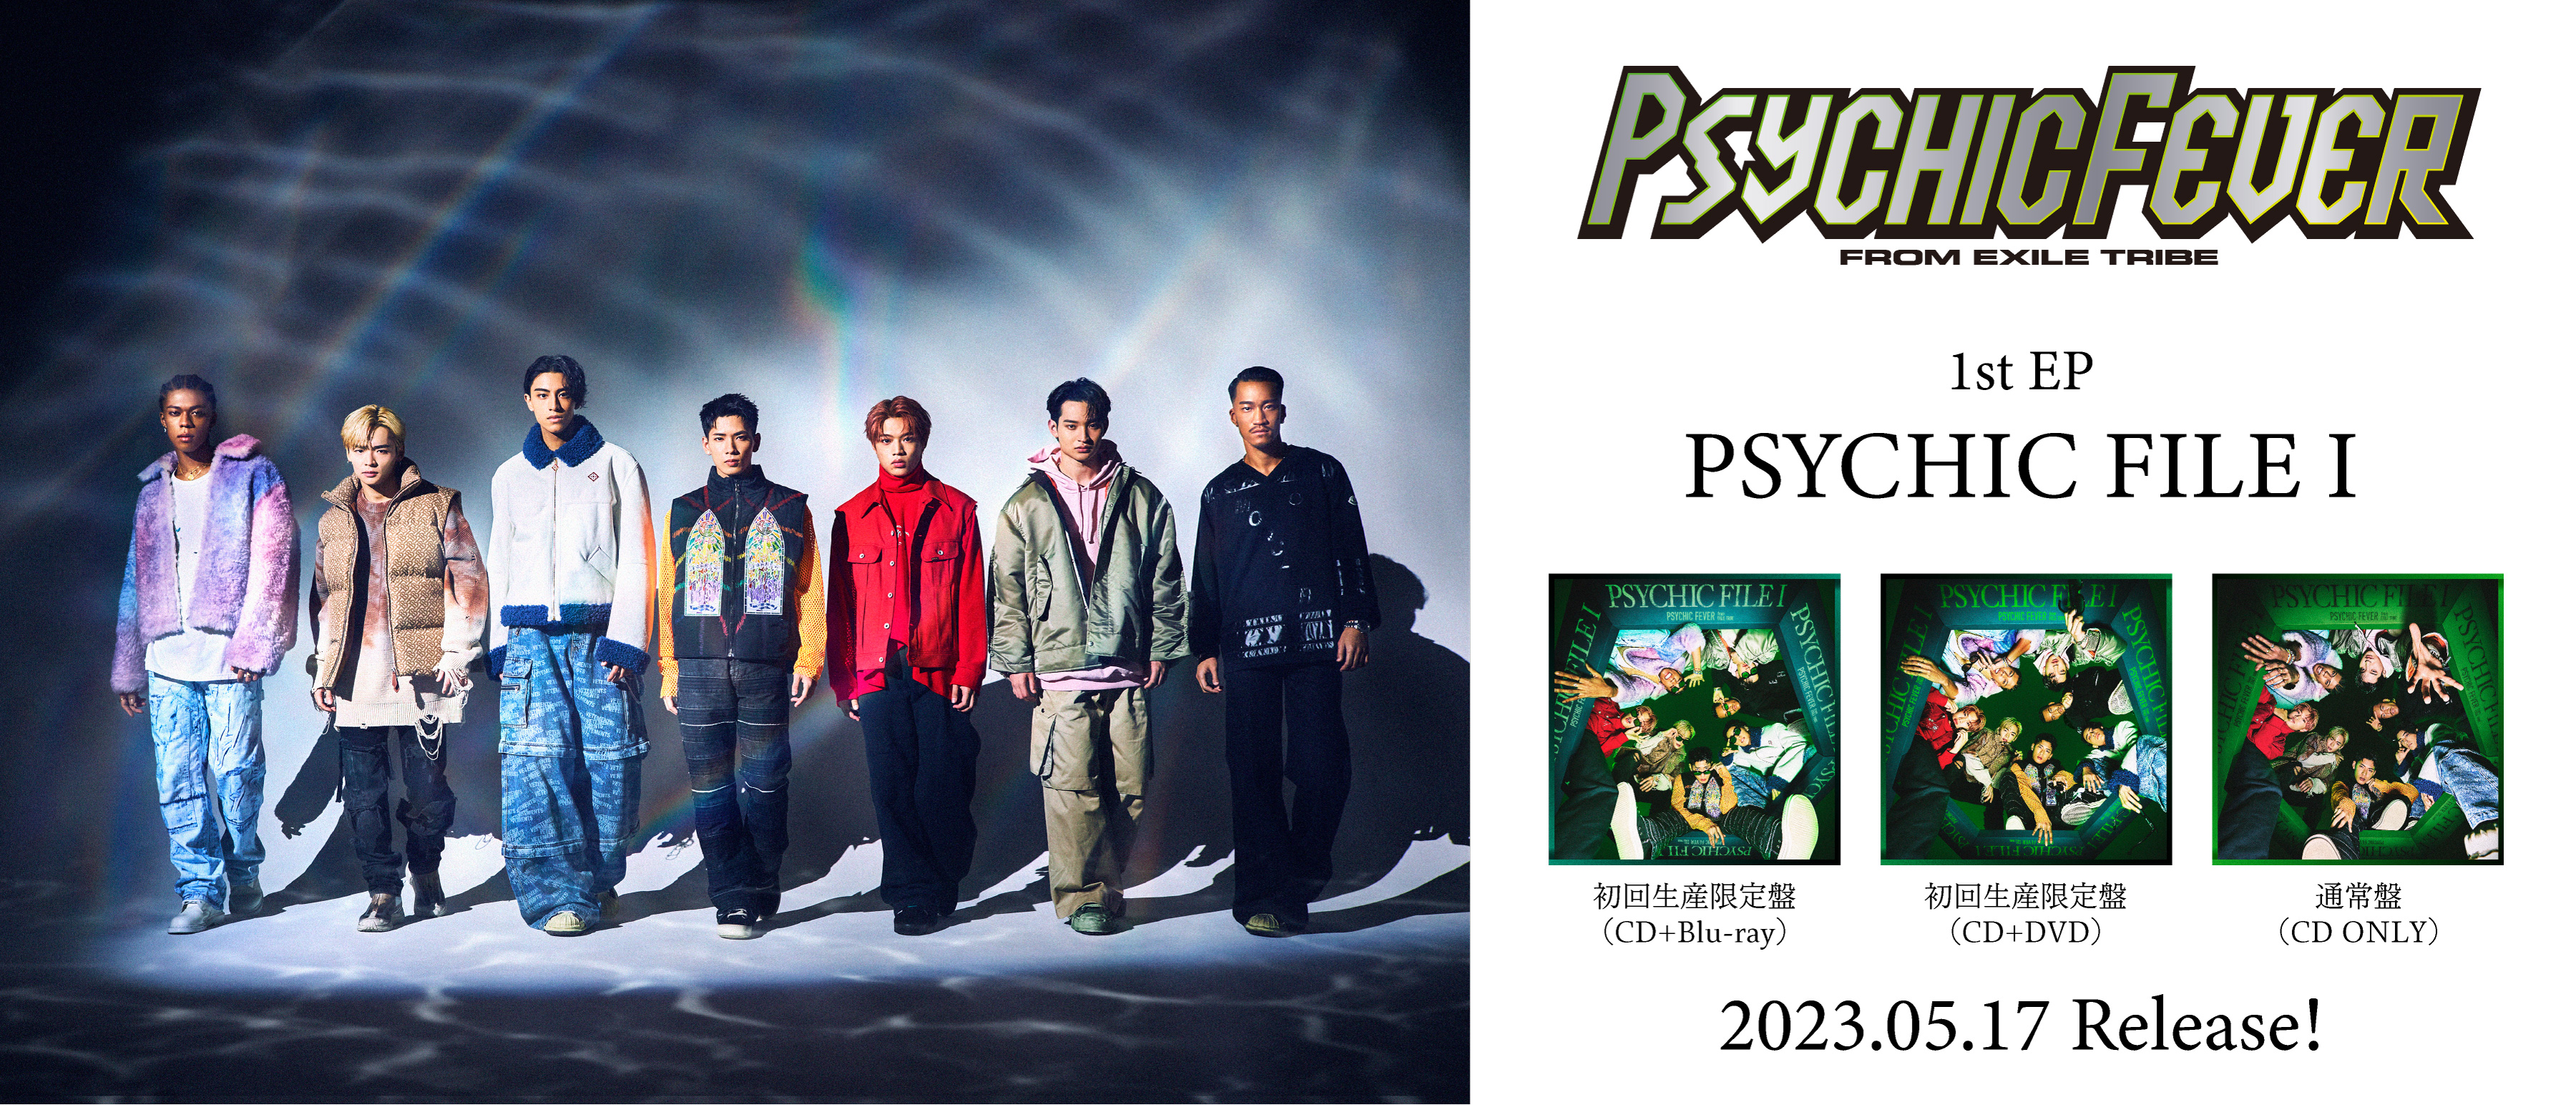 PSYCHIC FEVER from EXILE TRIBE 『PSYCHIC FILE I』